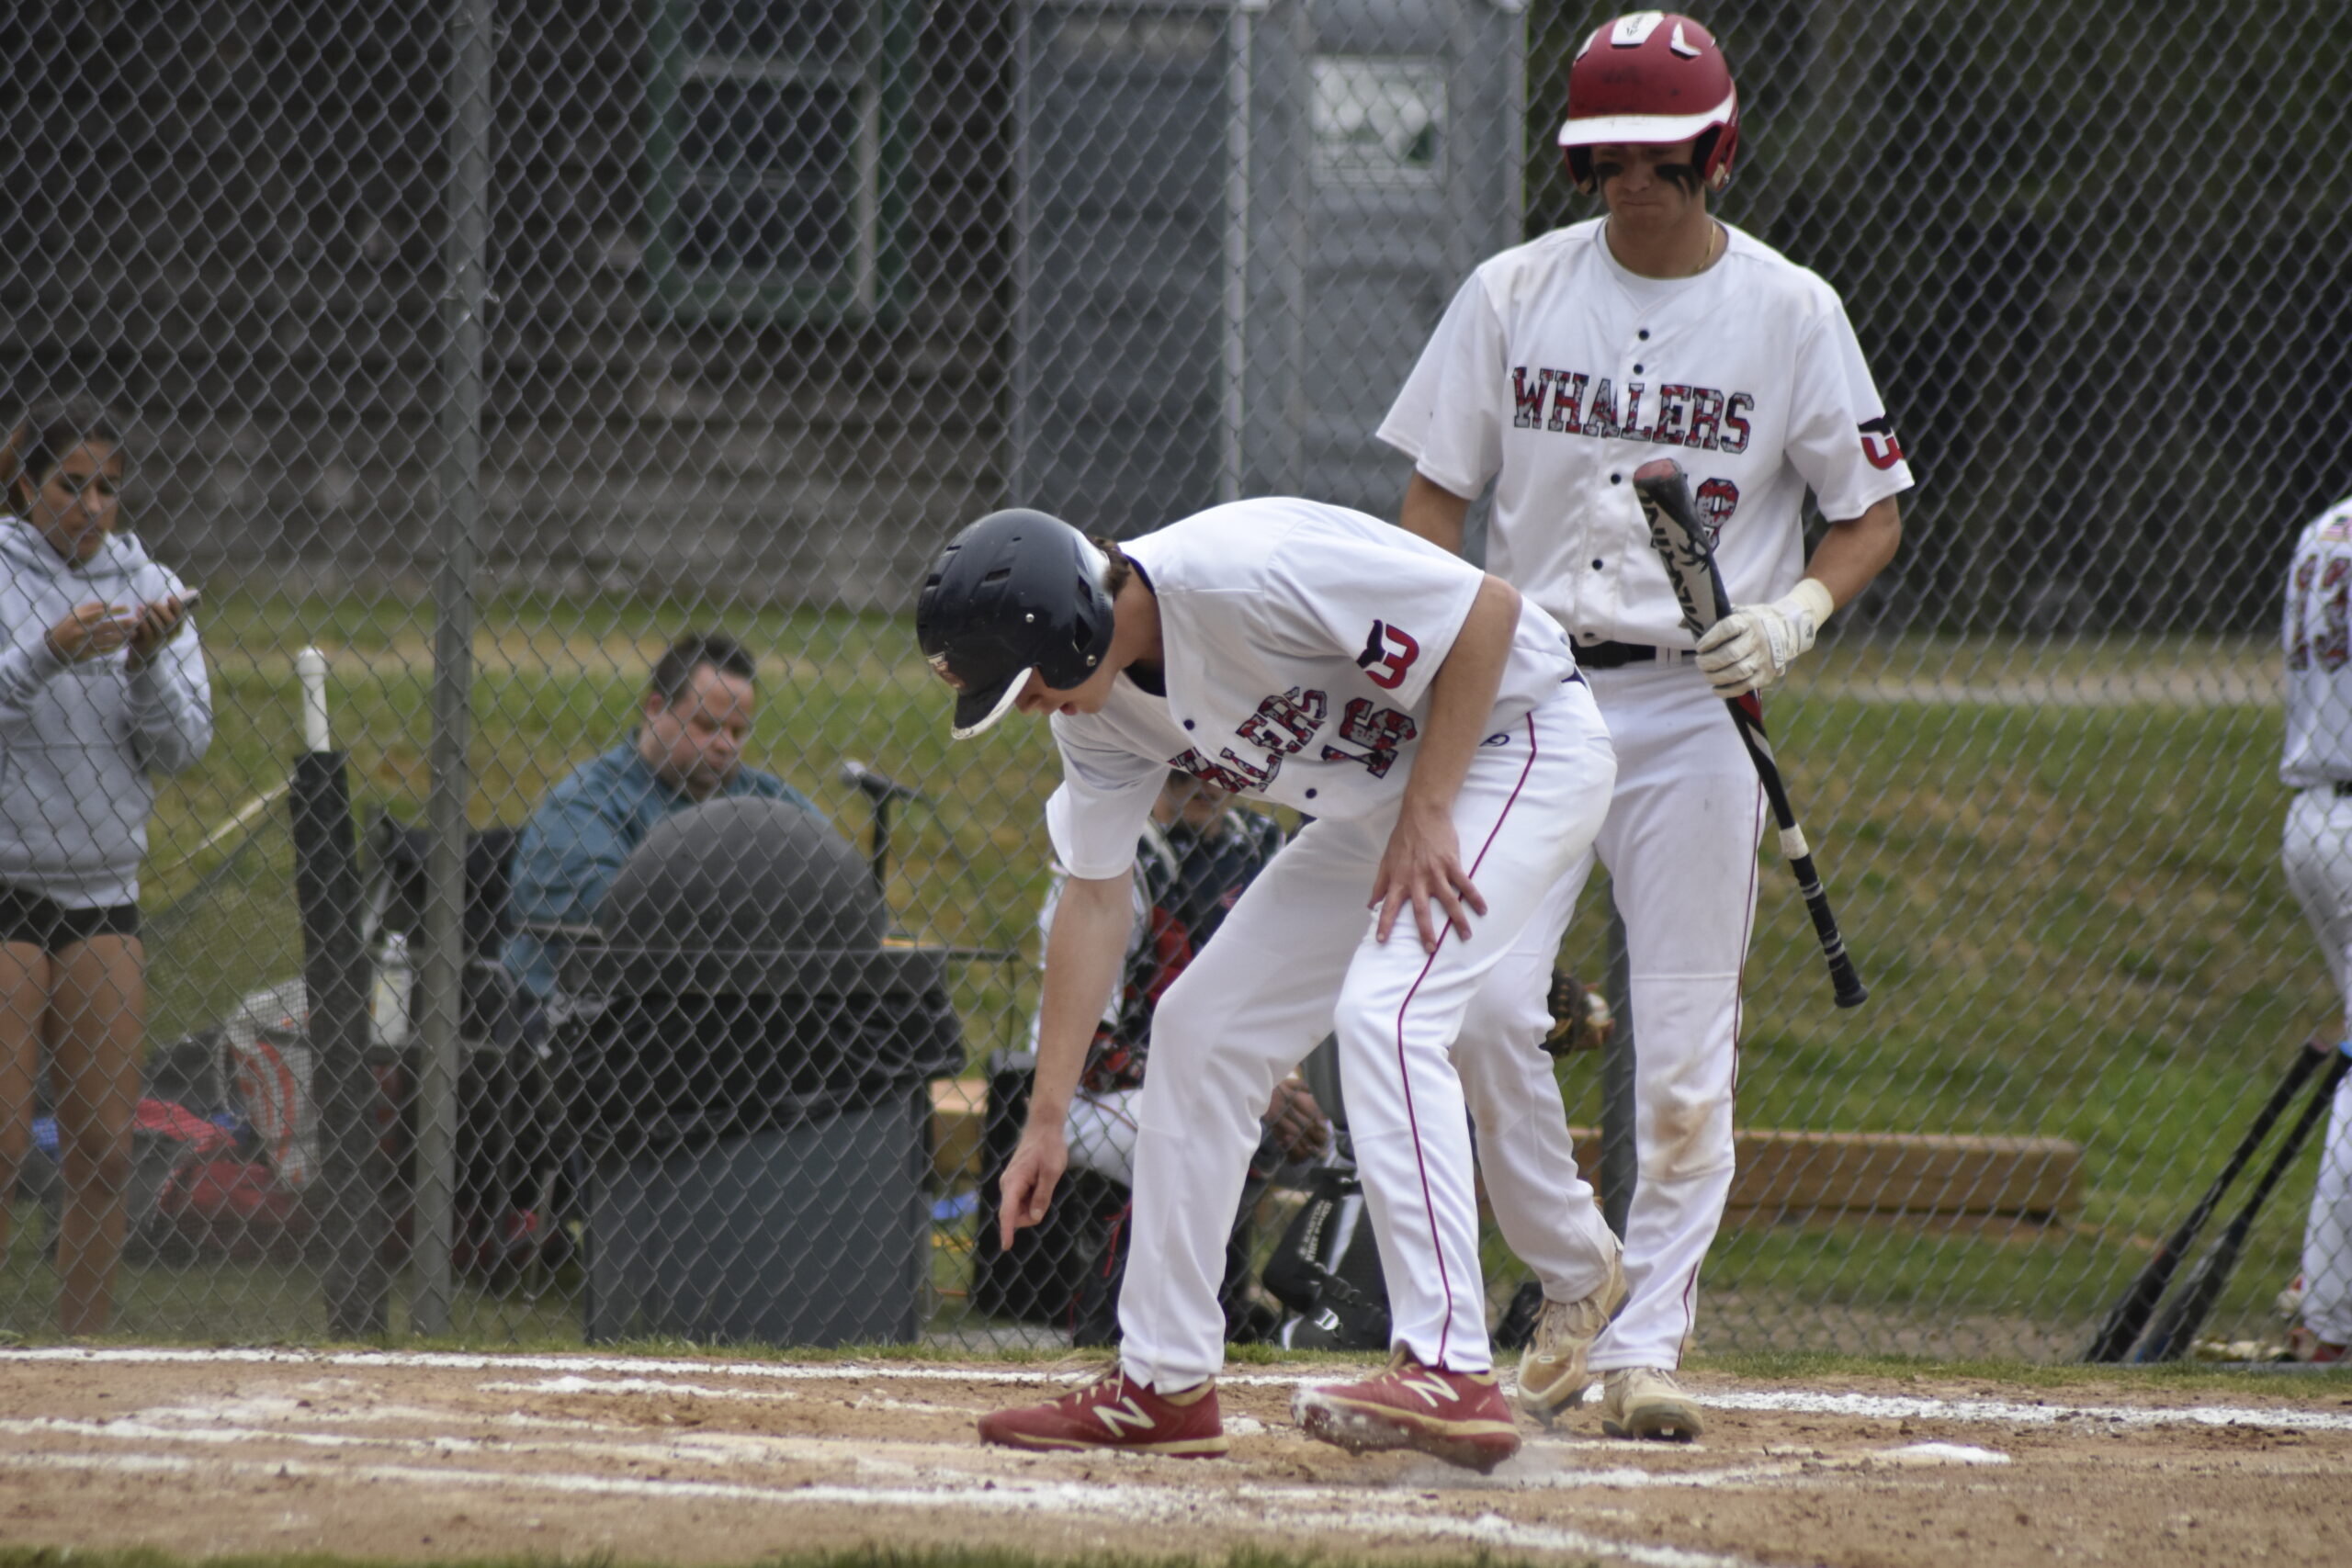 Dan Labrozzi reaches down to touch home plate for the game's first run on Friday.   DREW BUDD